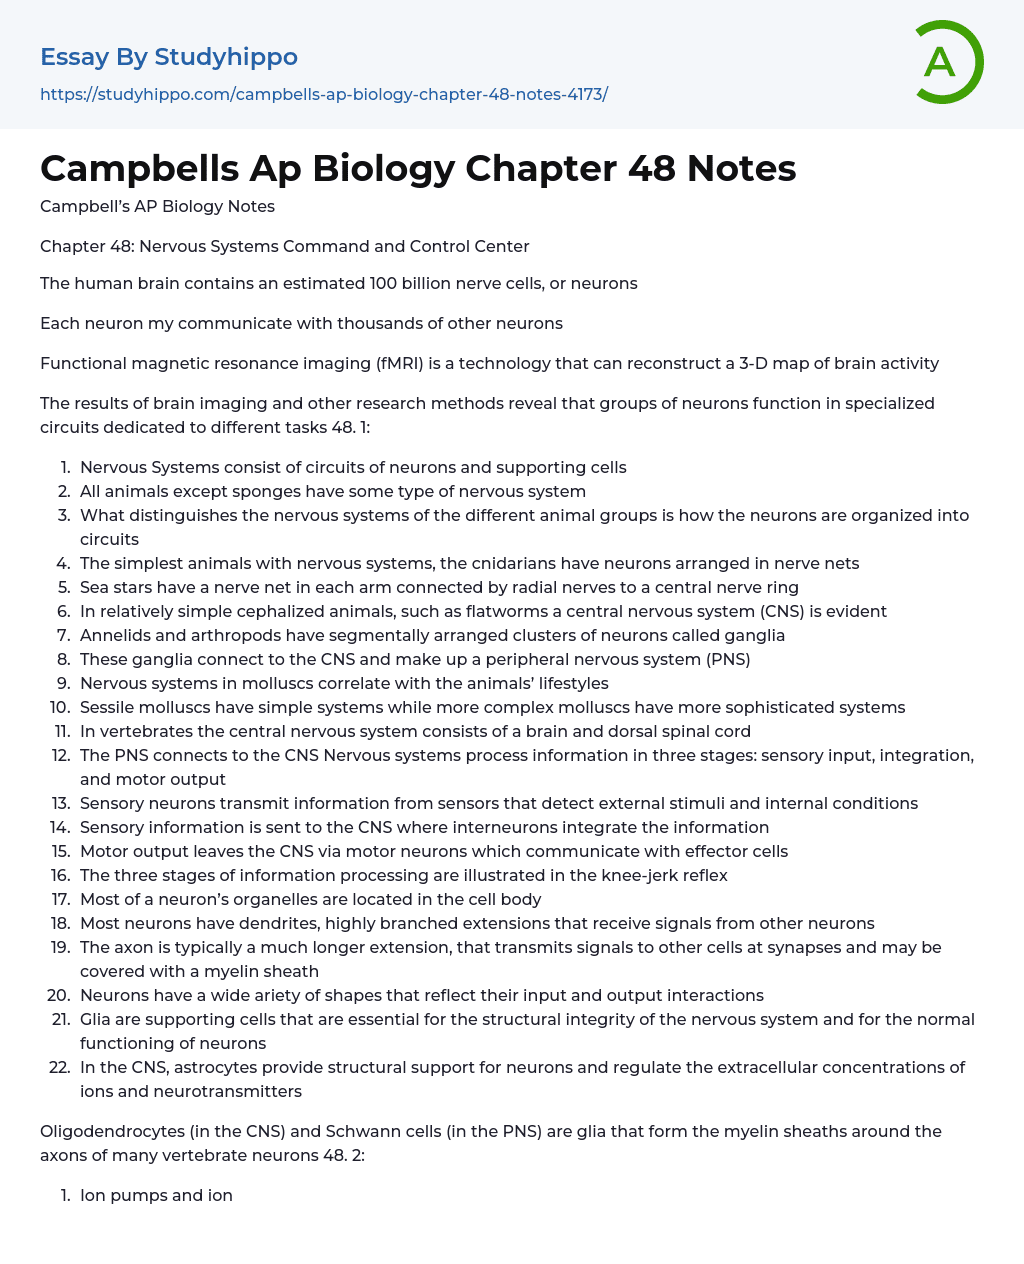 Campbells Ap Biology Chapter 48 Notes Essay Example